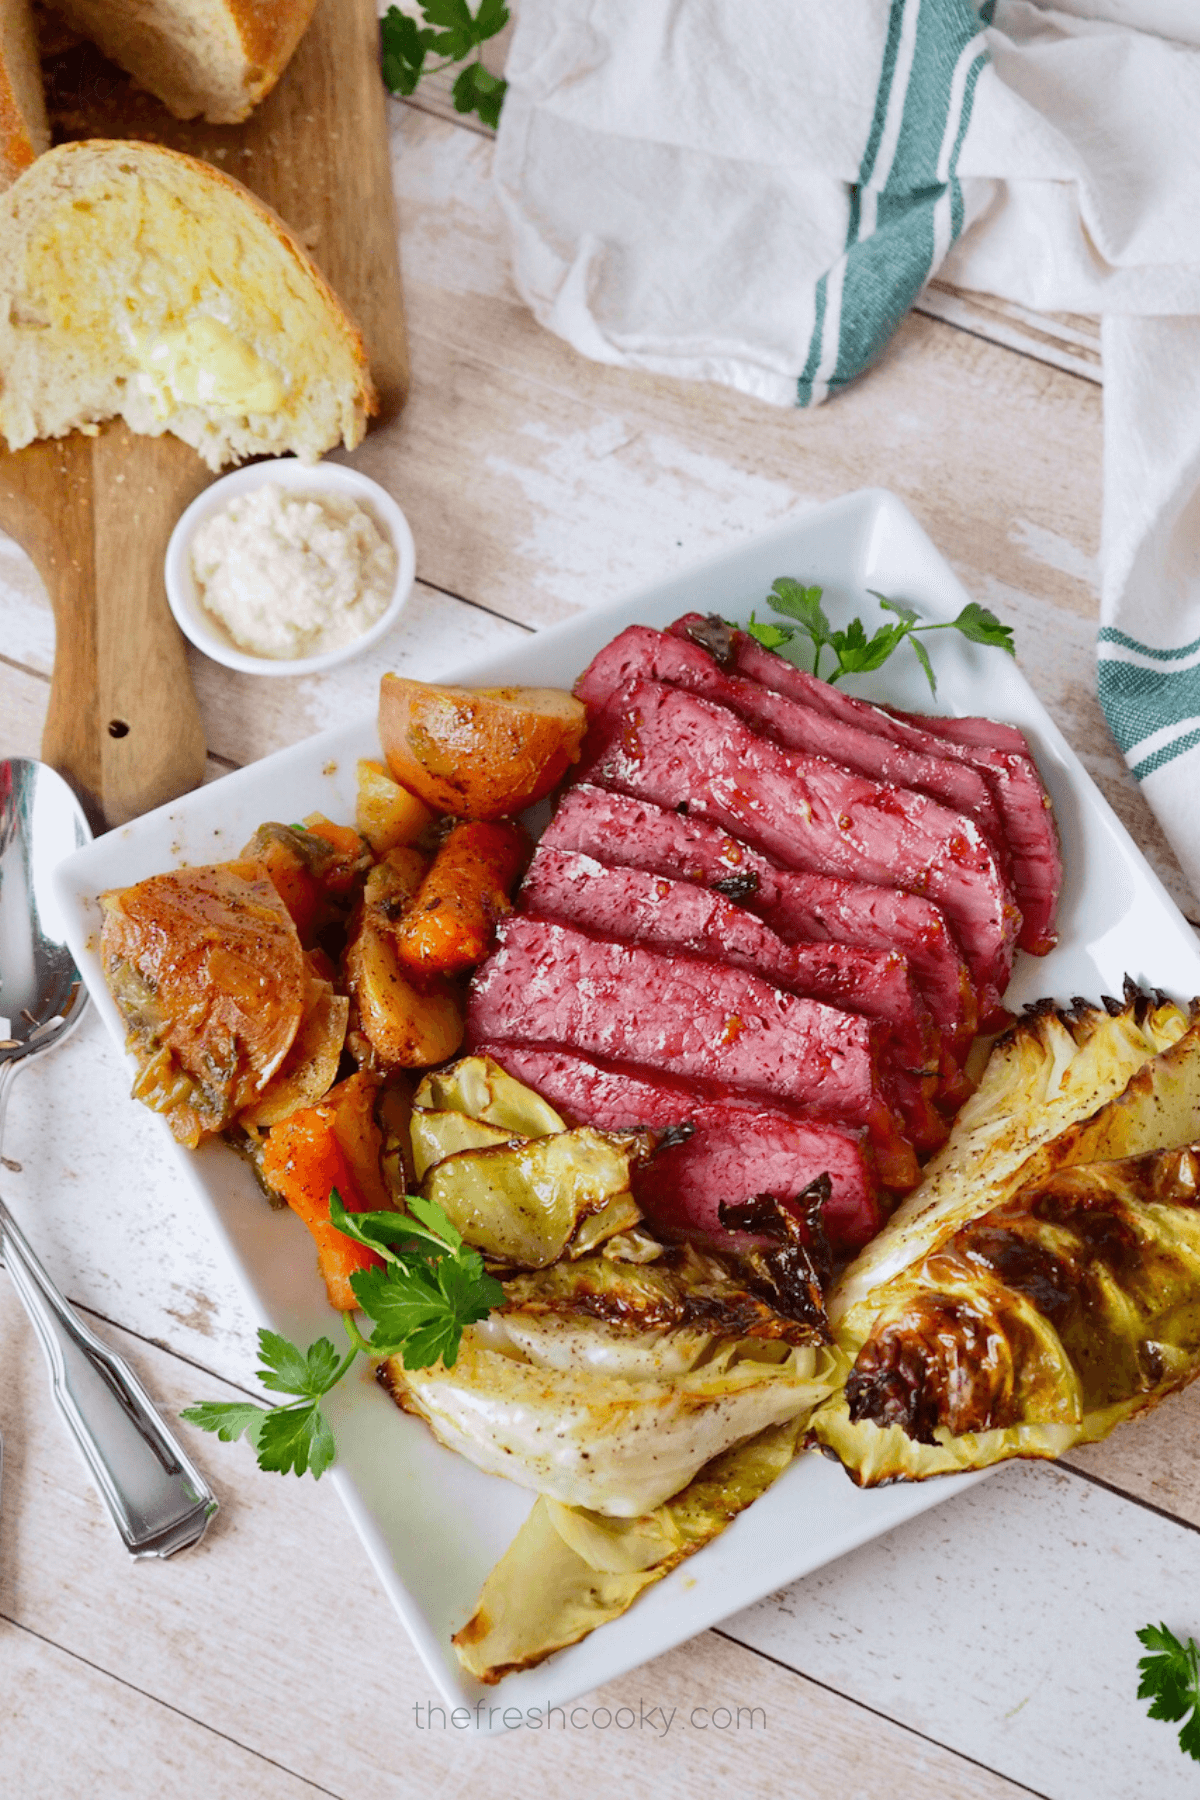 Baked Corned Beef recipe on plate with potatoes, carrots and roasted cabbage with bread in background.